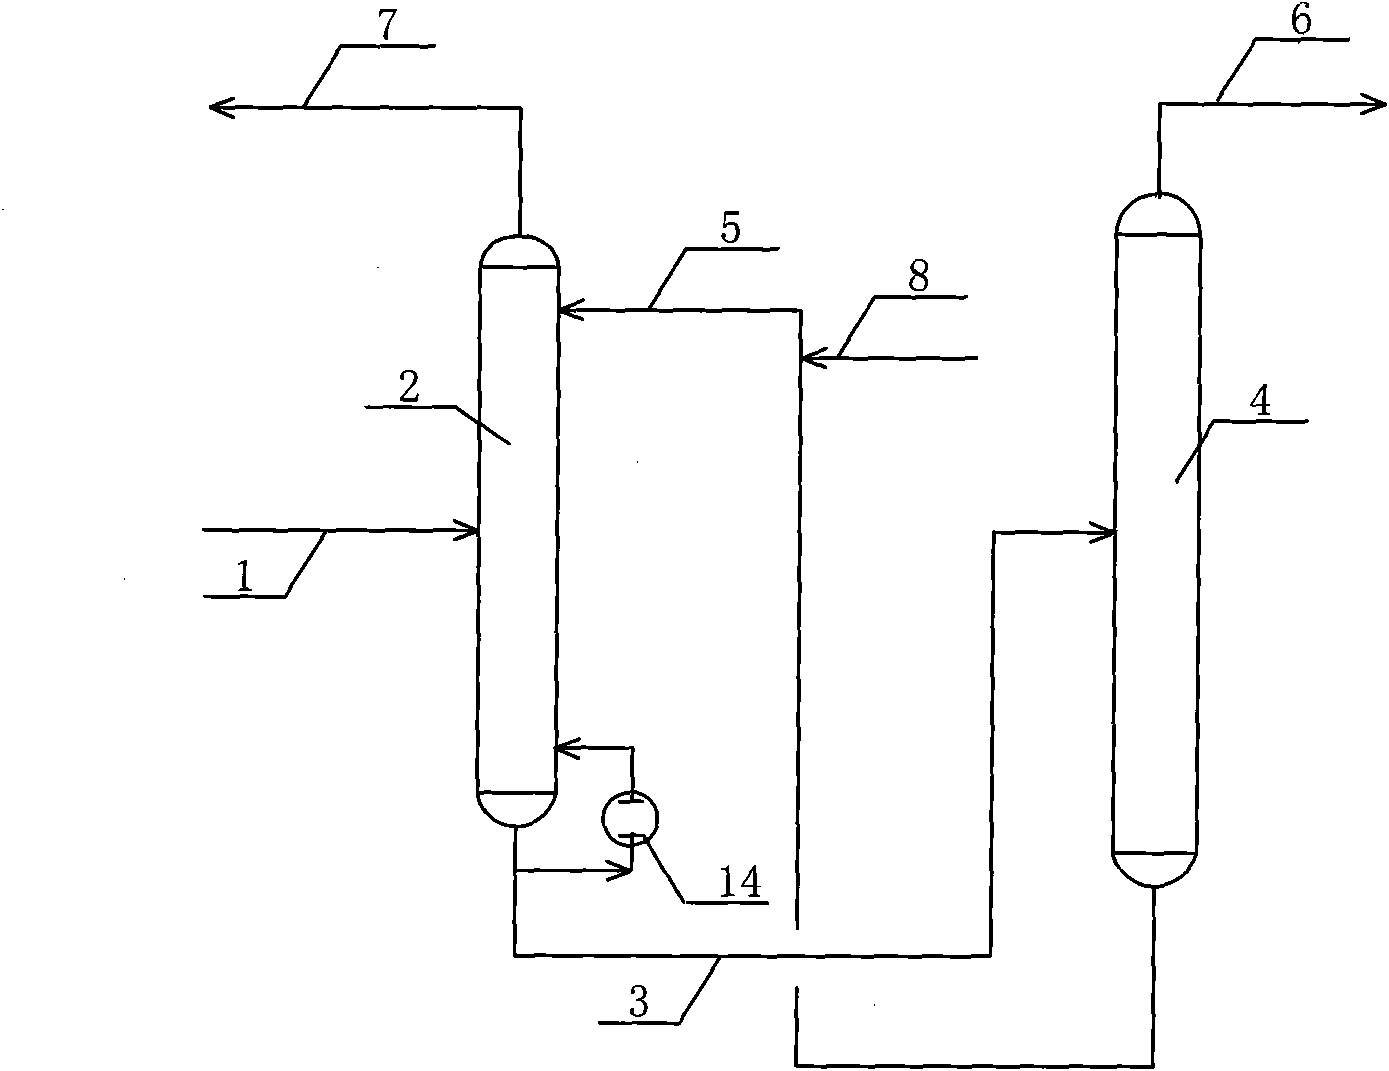 Refining method of virgin gas containing ethane used in process for preparing ethylbenzene by ethane